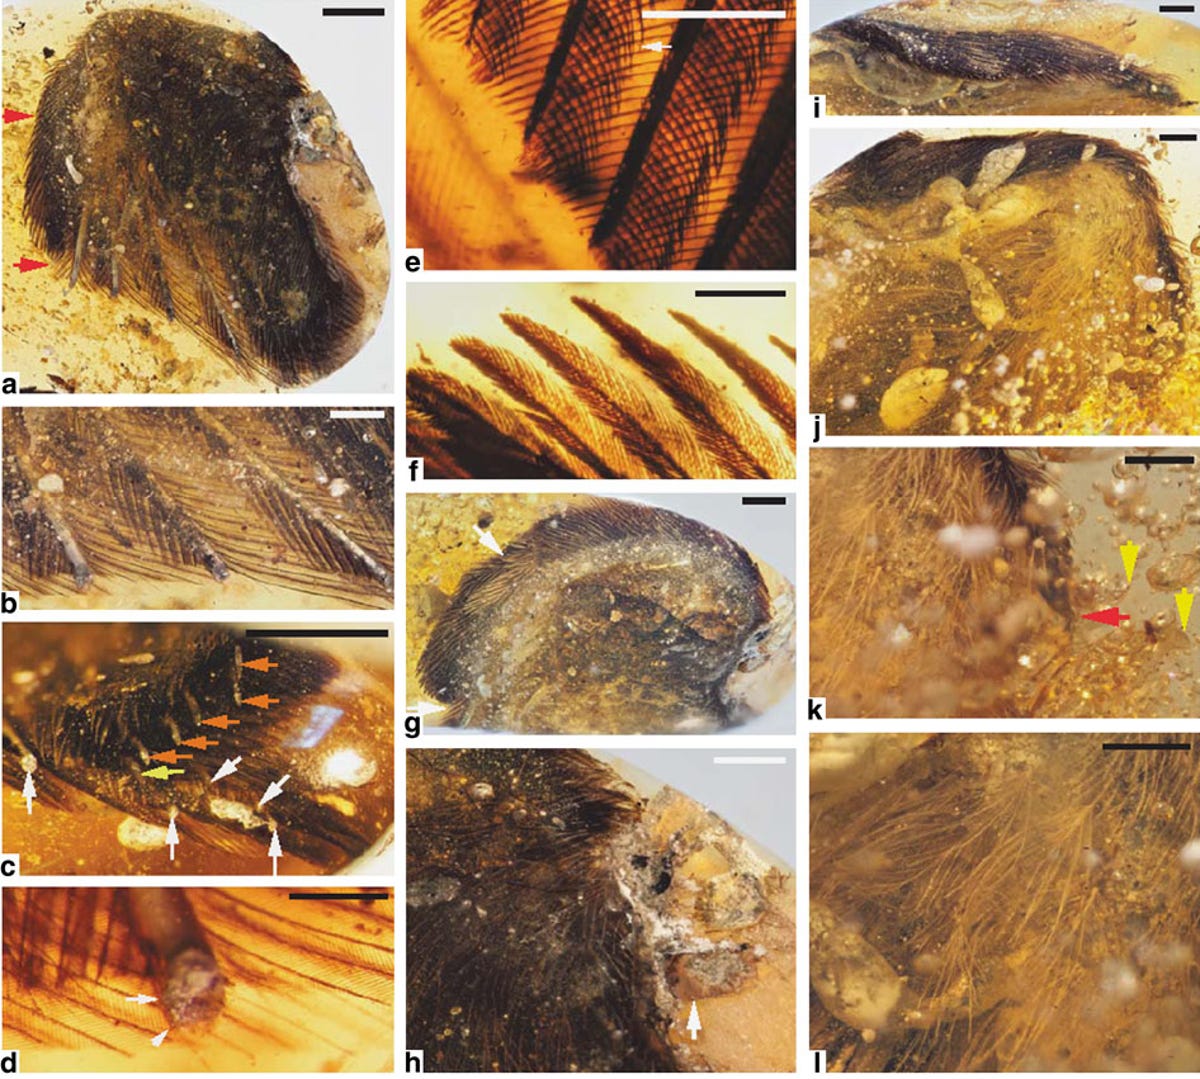 Various looks at amber fossilized wings that likely belonged to an avian dinosaur.